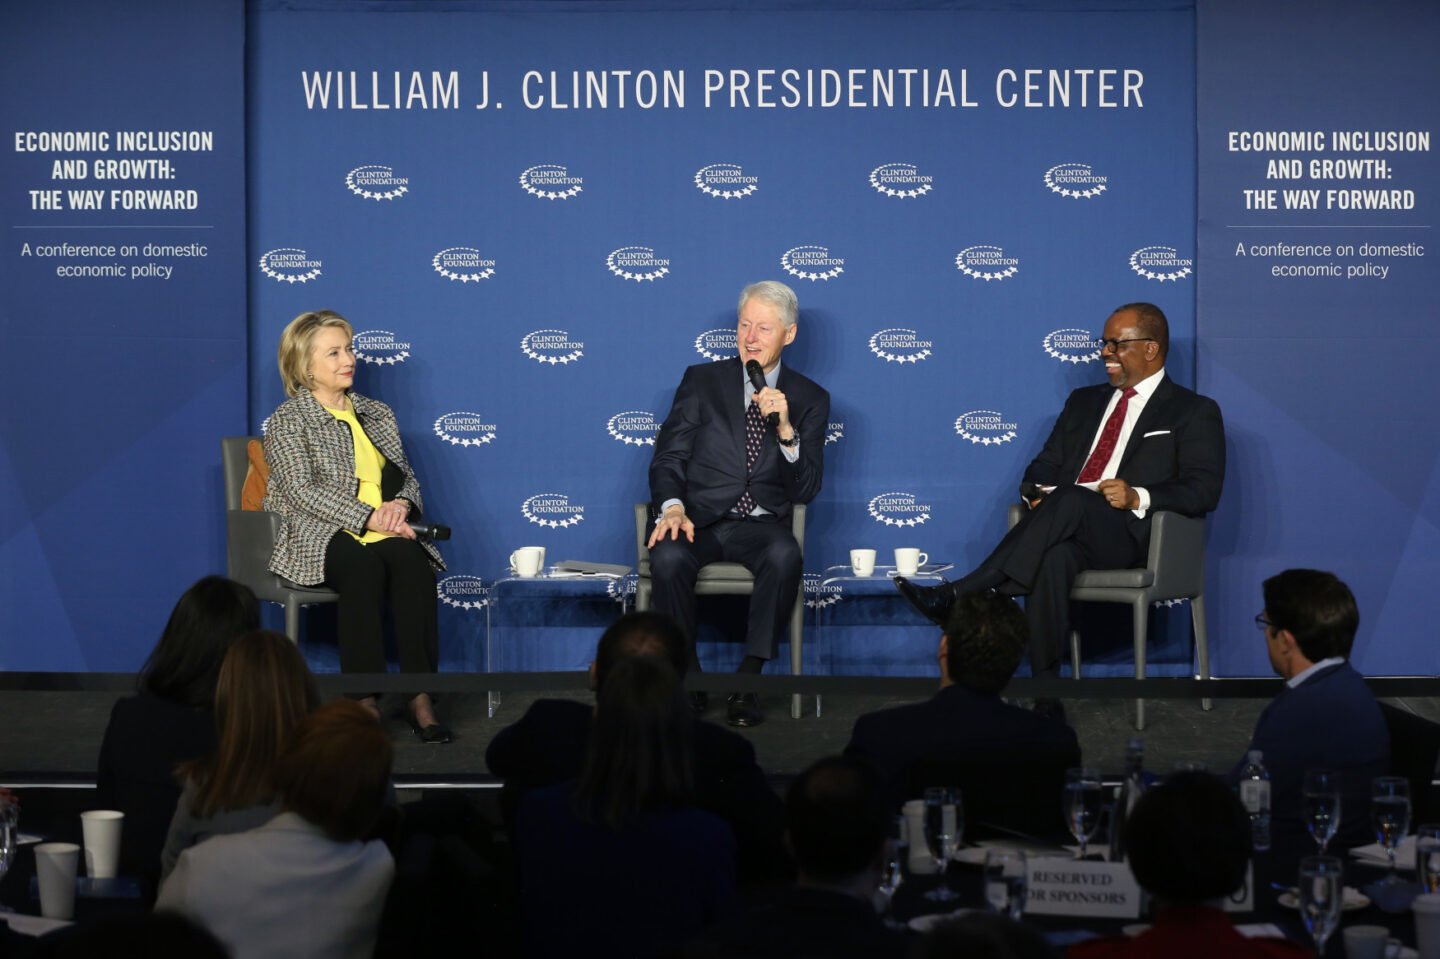 Secretary Clinton and President Clinton participate in a panel discussion